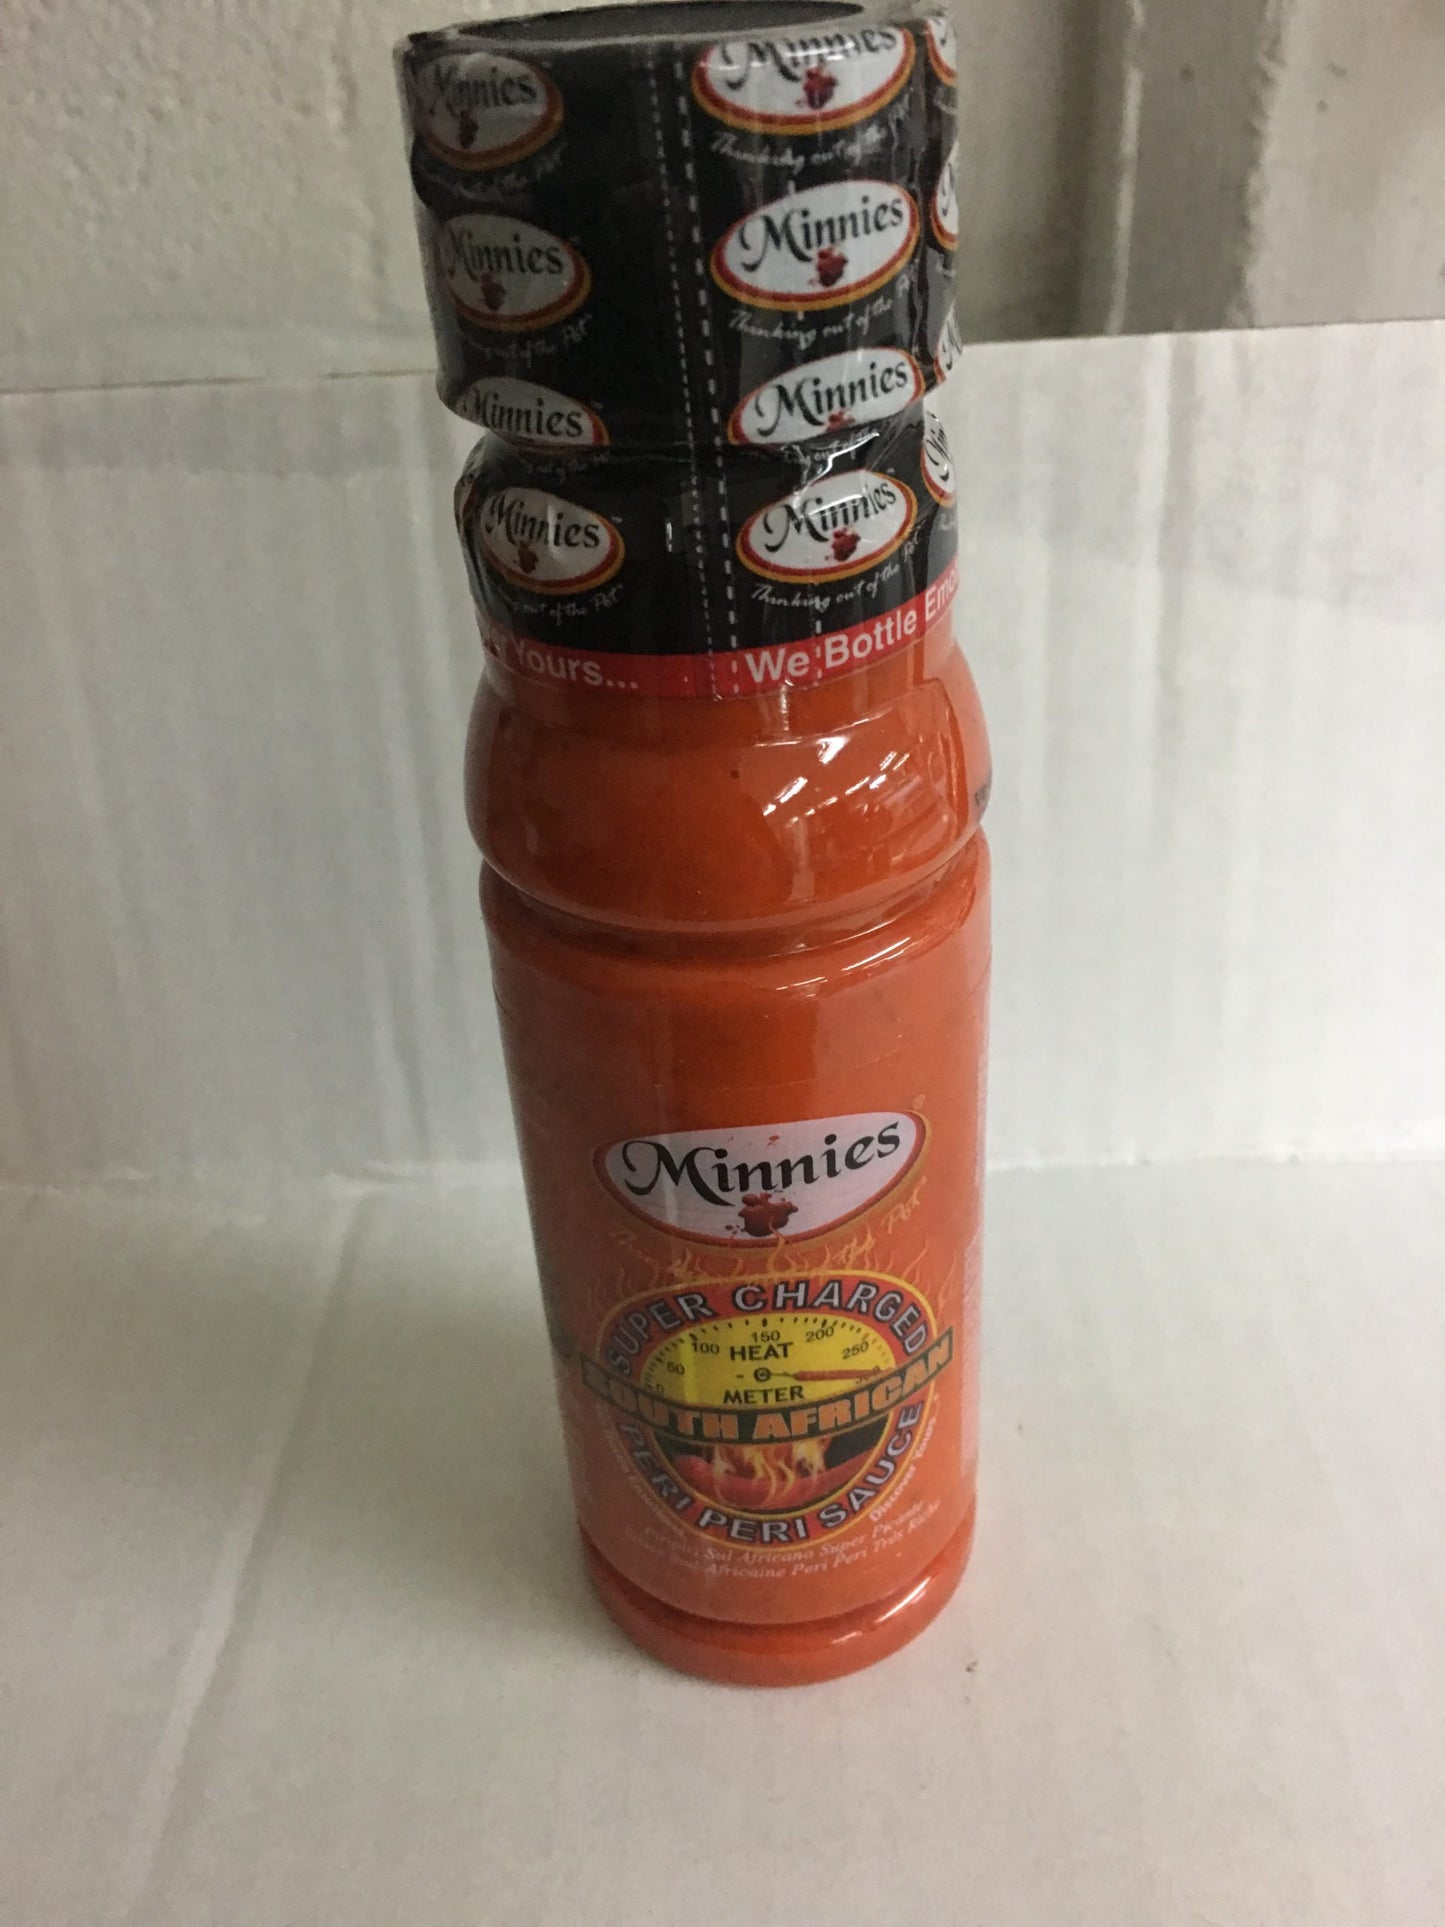 Minnies Supercharged South African Peri Peri Sauce